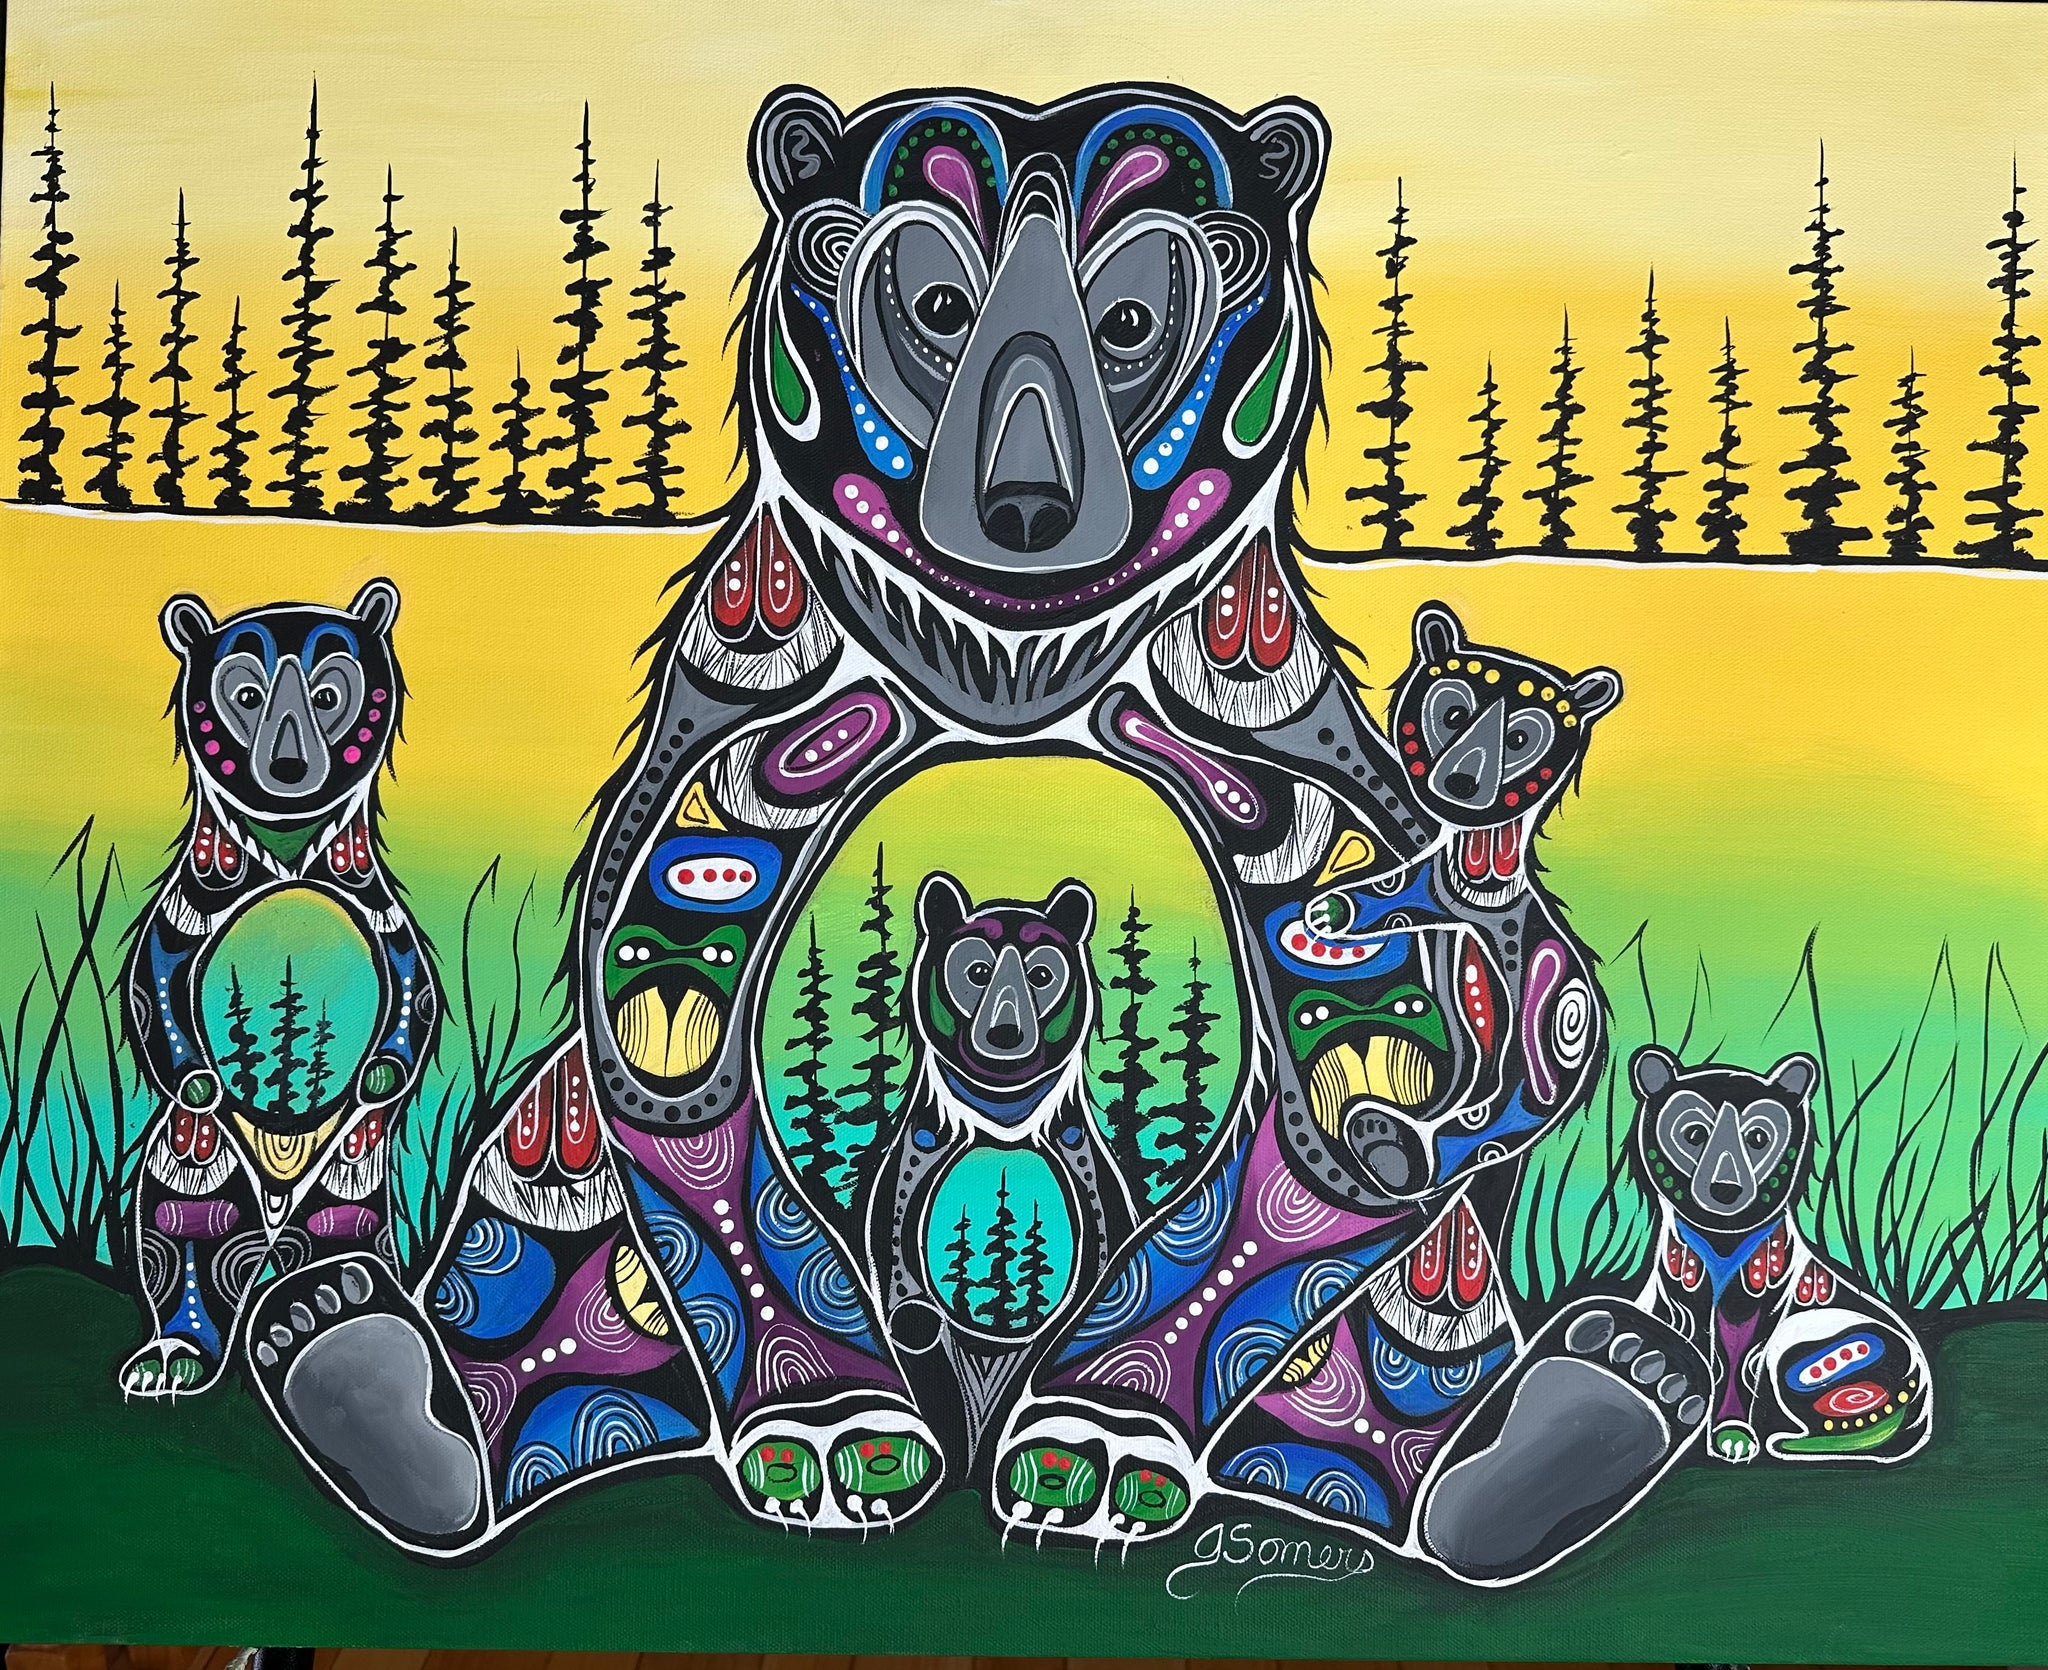 Bear Medicine also by Jessica Somers' expresses her Indigenous heritage and relationship.